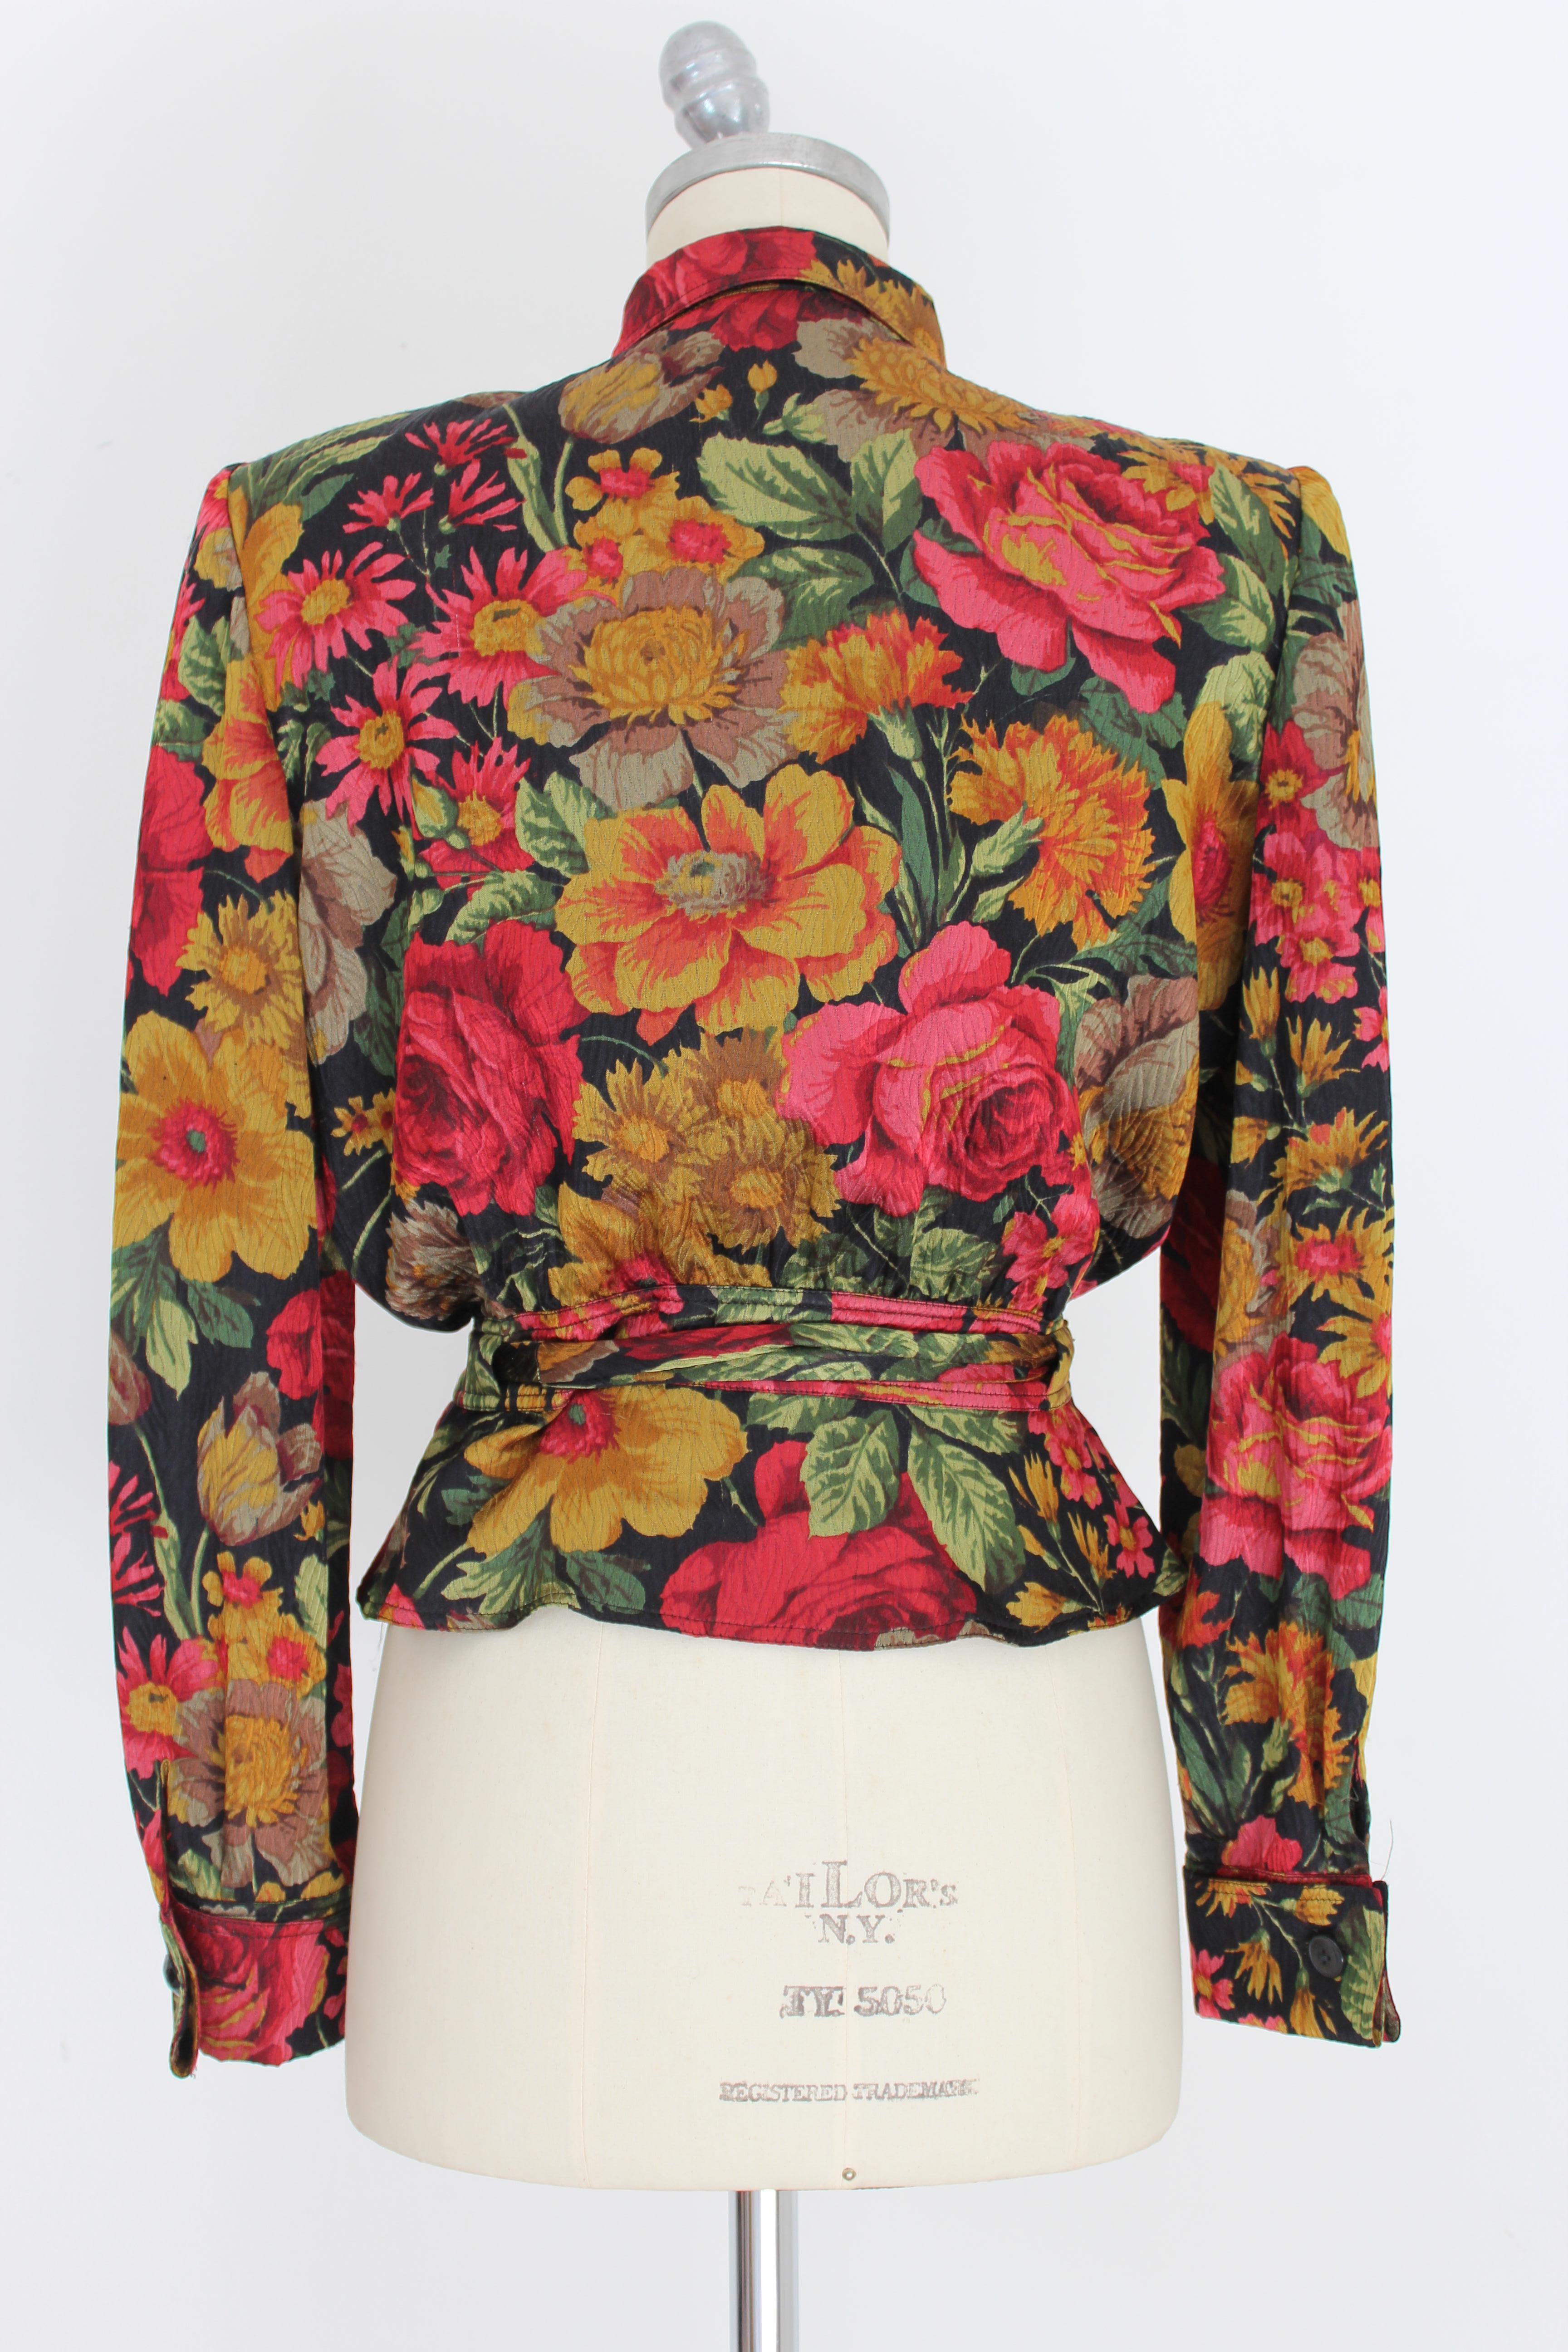 Valentino Miss V 80's vintage women's shirt. Short pattern at the waist, 100% silk, black with multicolored flowers. Bow at the waist and on the collar, cuffs with cufflinks. Made in Italy. Excellent vintage condition.

Size: 42 It 8 Us 10